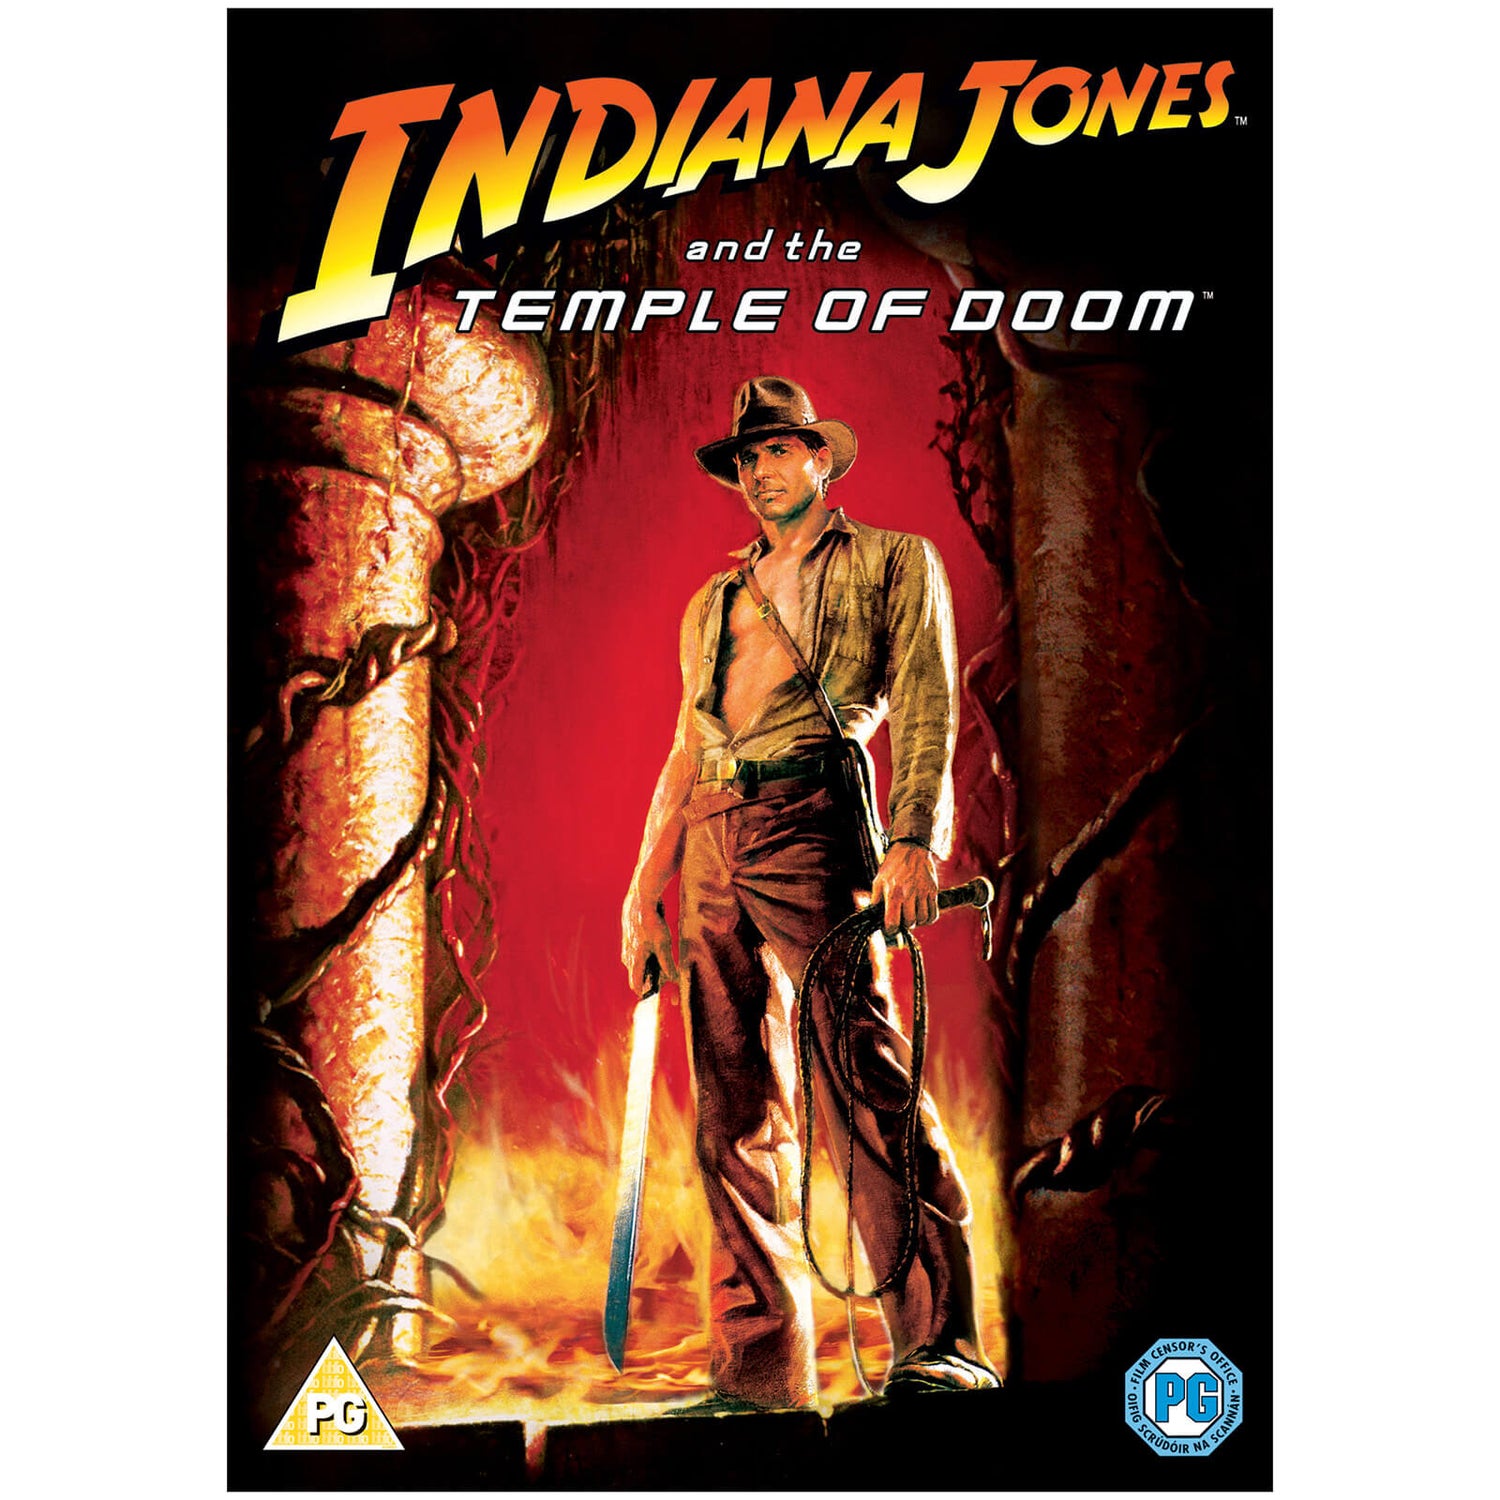 THE ADVENTURES OF INDIANA JONES Collection Harrison FORD (5 DVD